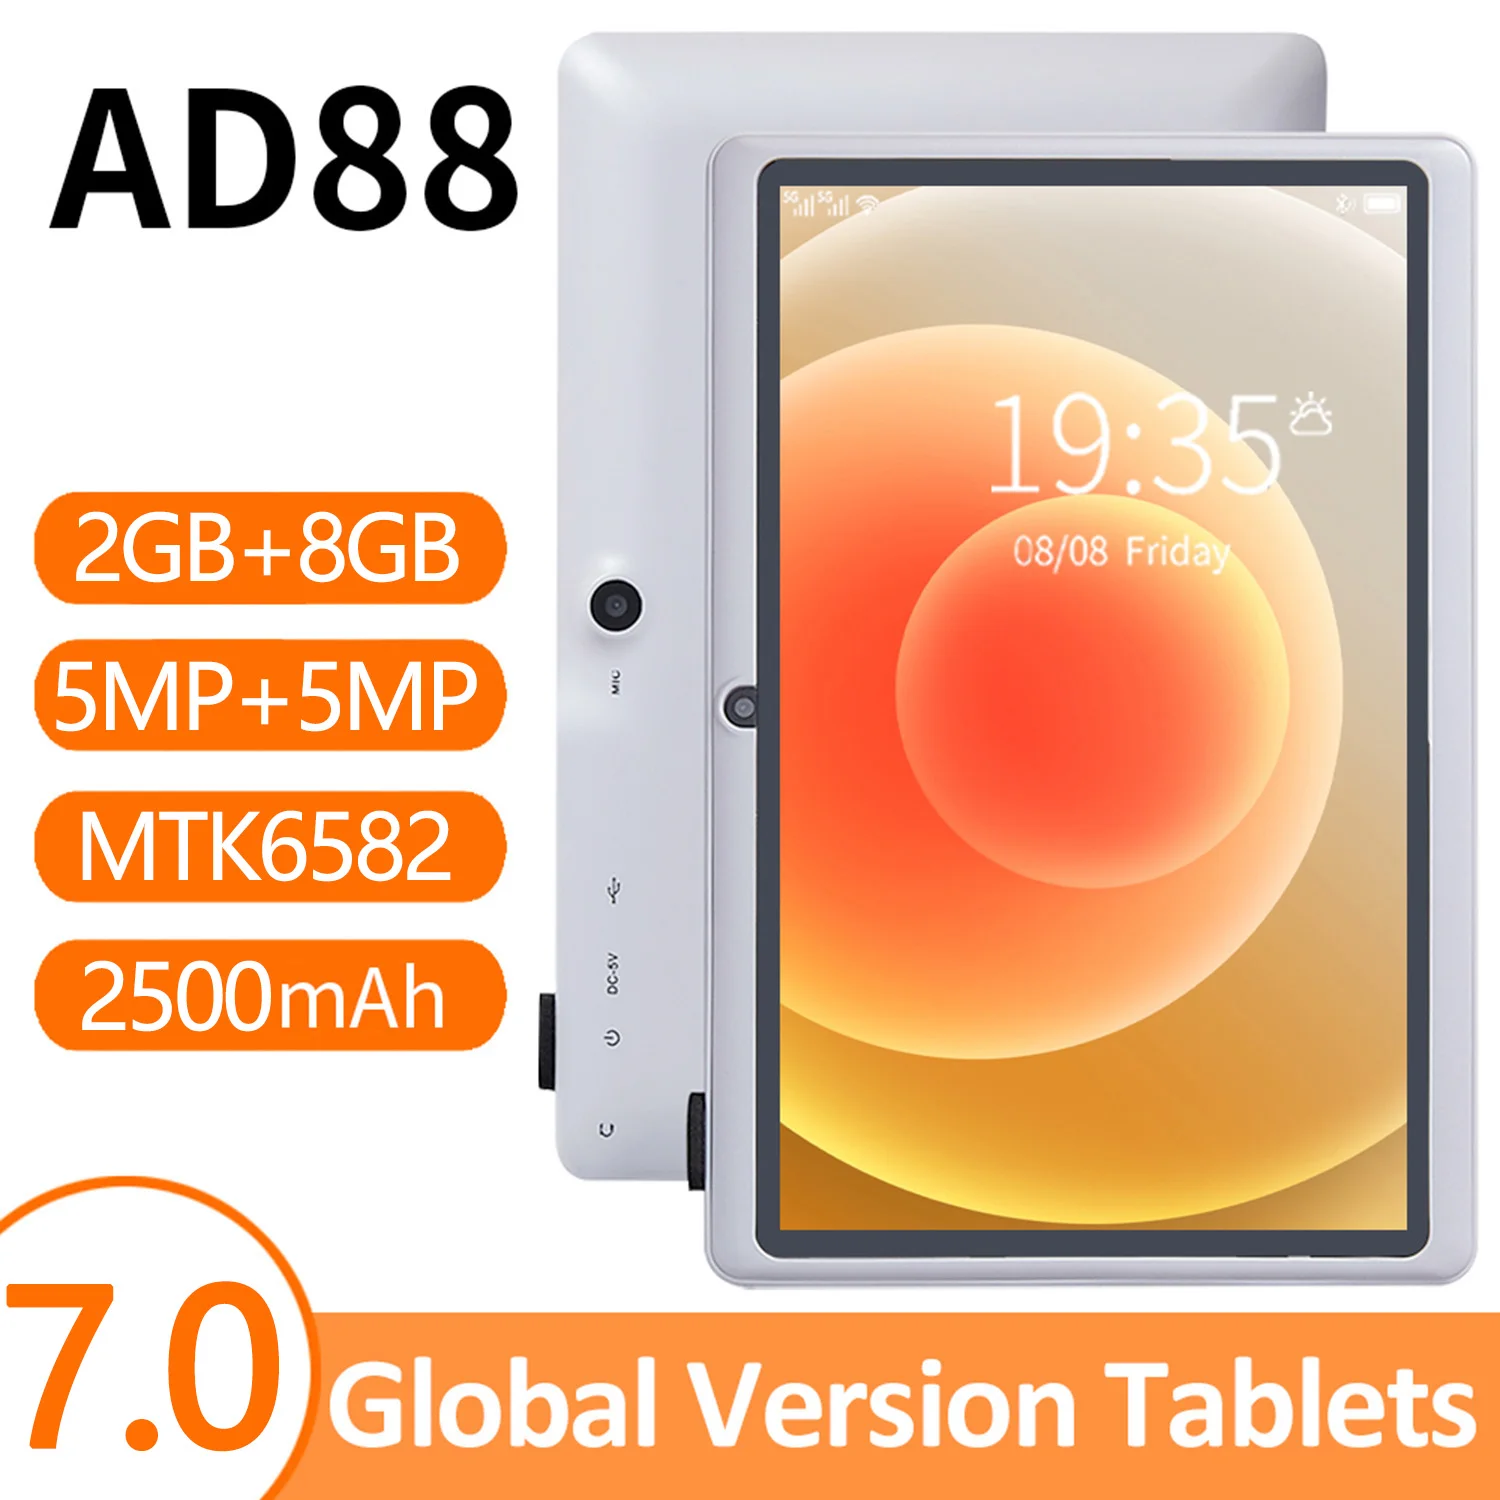 New Global Version AD88 Tablet 7.0 inch 2GB RAM 8GB ROM Android 5.0 tablet Android 2500mAh smart tablet